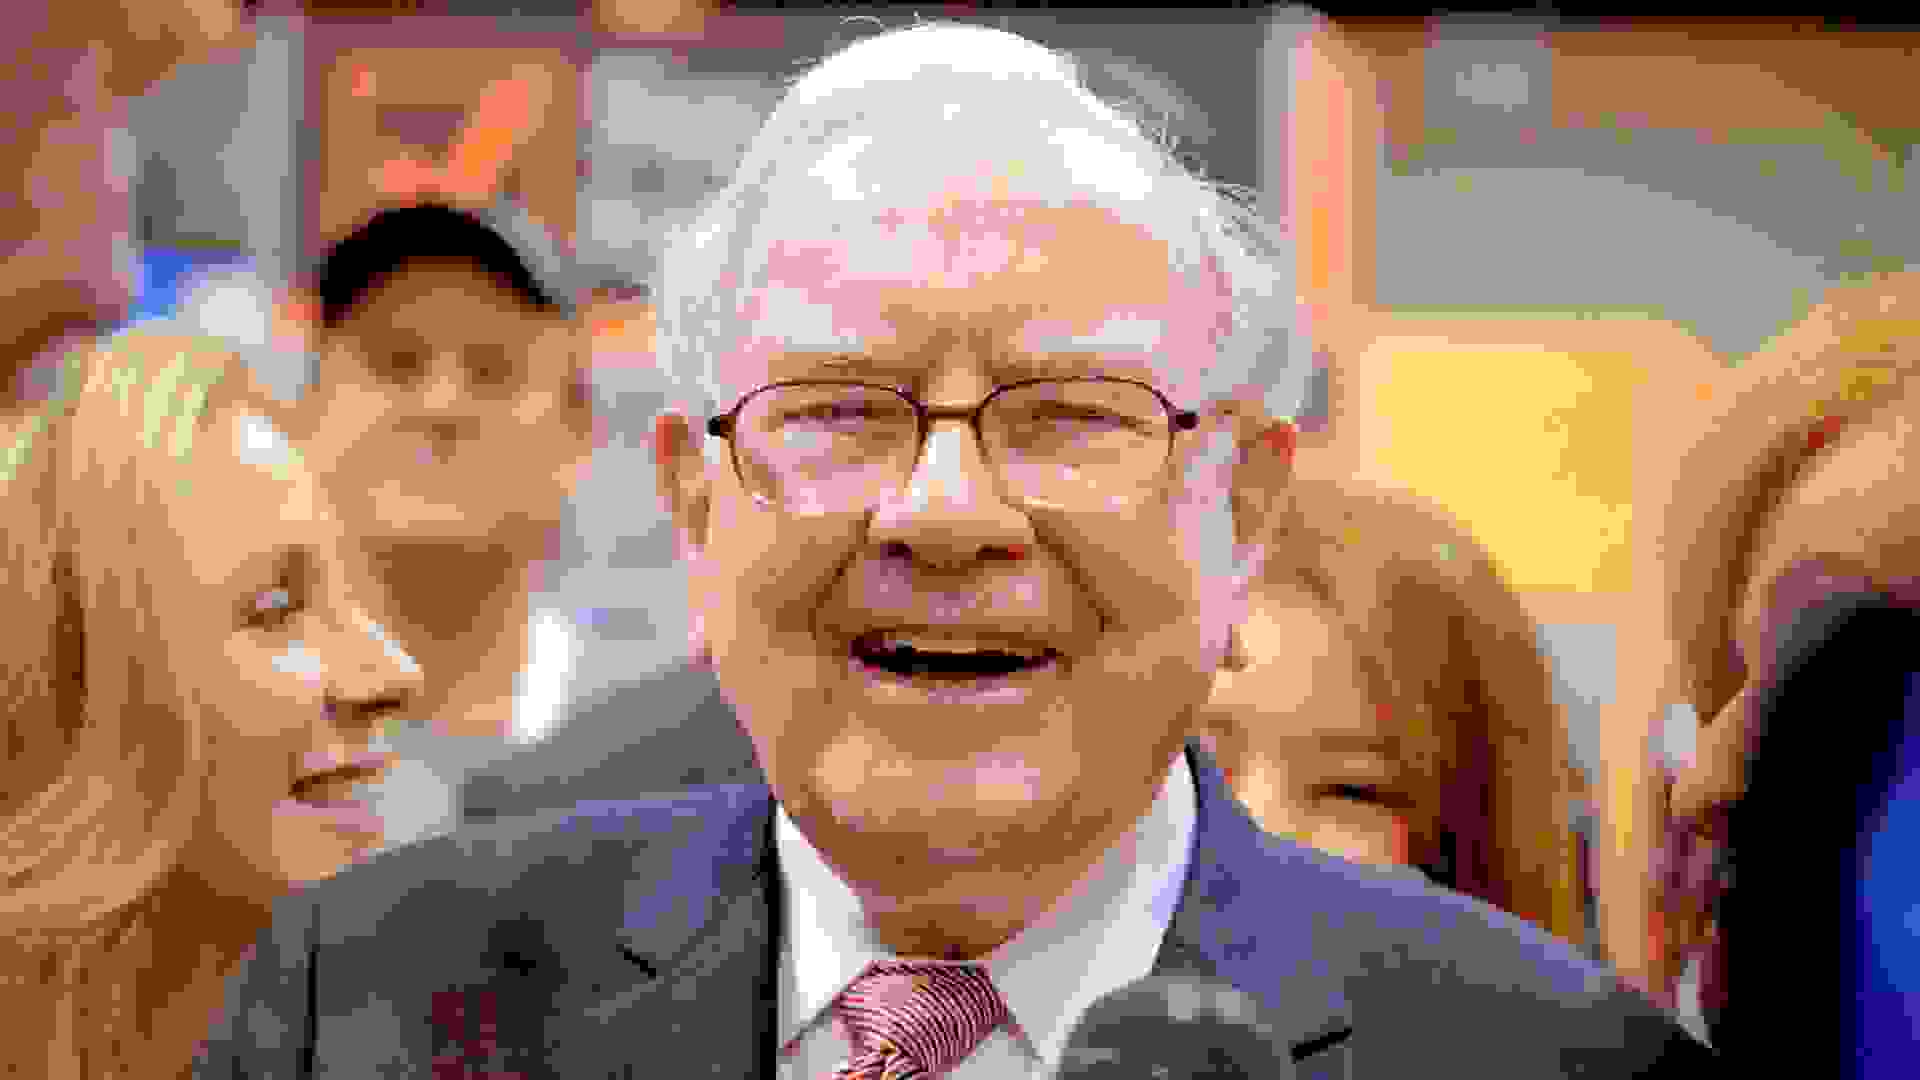 Berkshire Hathaway Chairman and CEO Warren Buffett laughs while touring the exhibit floor at the CenturyLink Center in Omaha, Neb